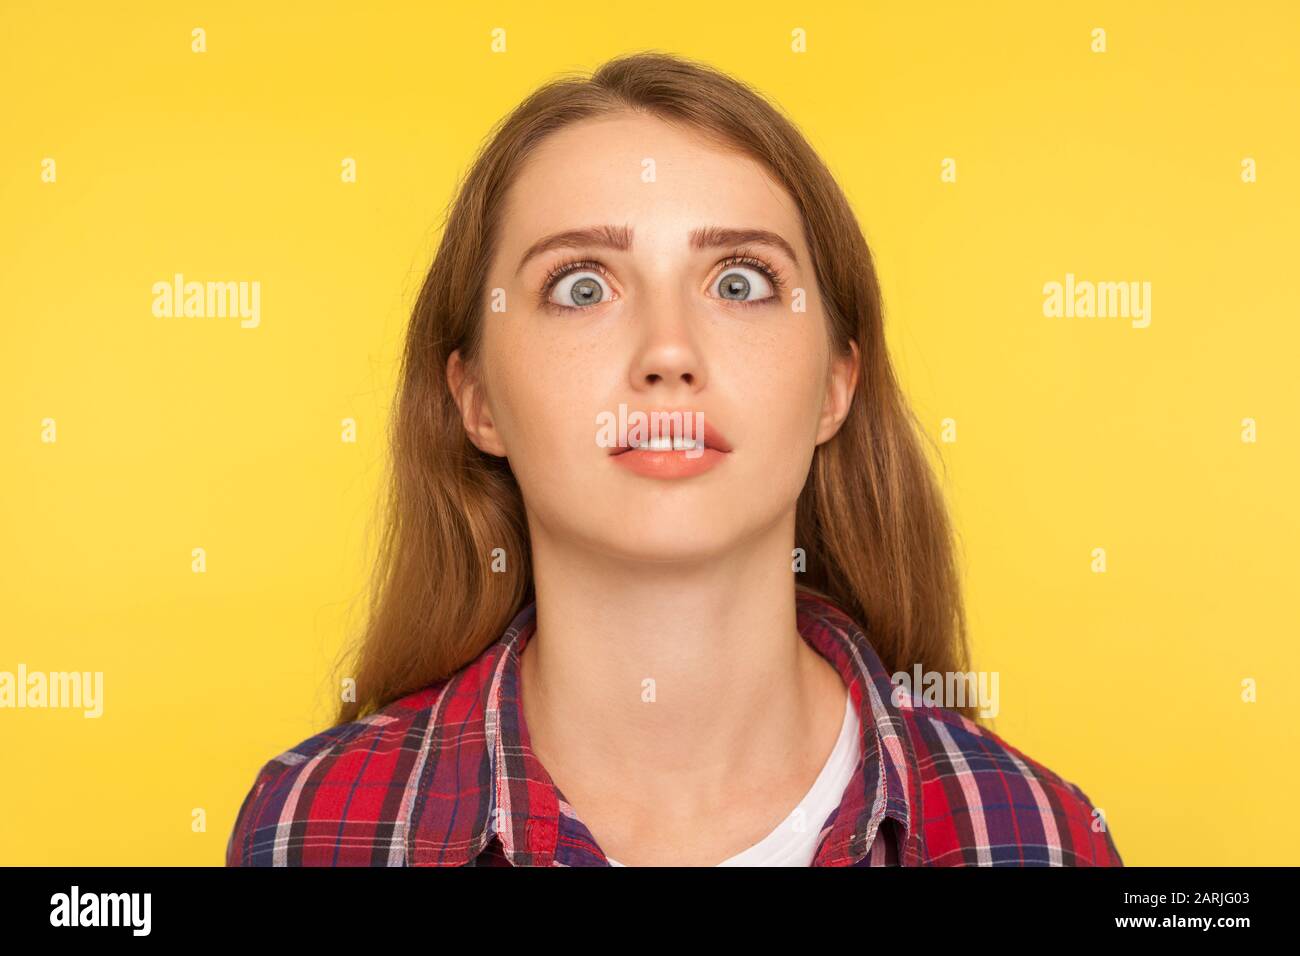 Closeup portrait of funny silly ginger woman in checkered shirt looking up cross eyed with stupid dumb face, girl has awkward confused comical express Stock Photo